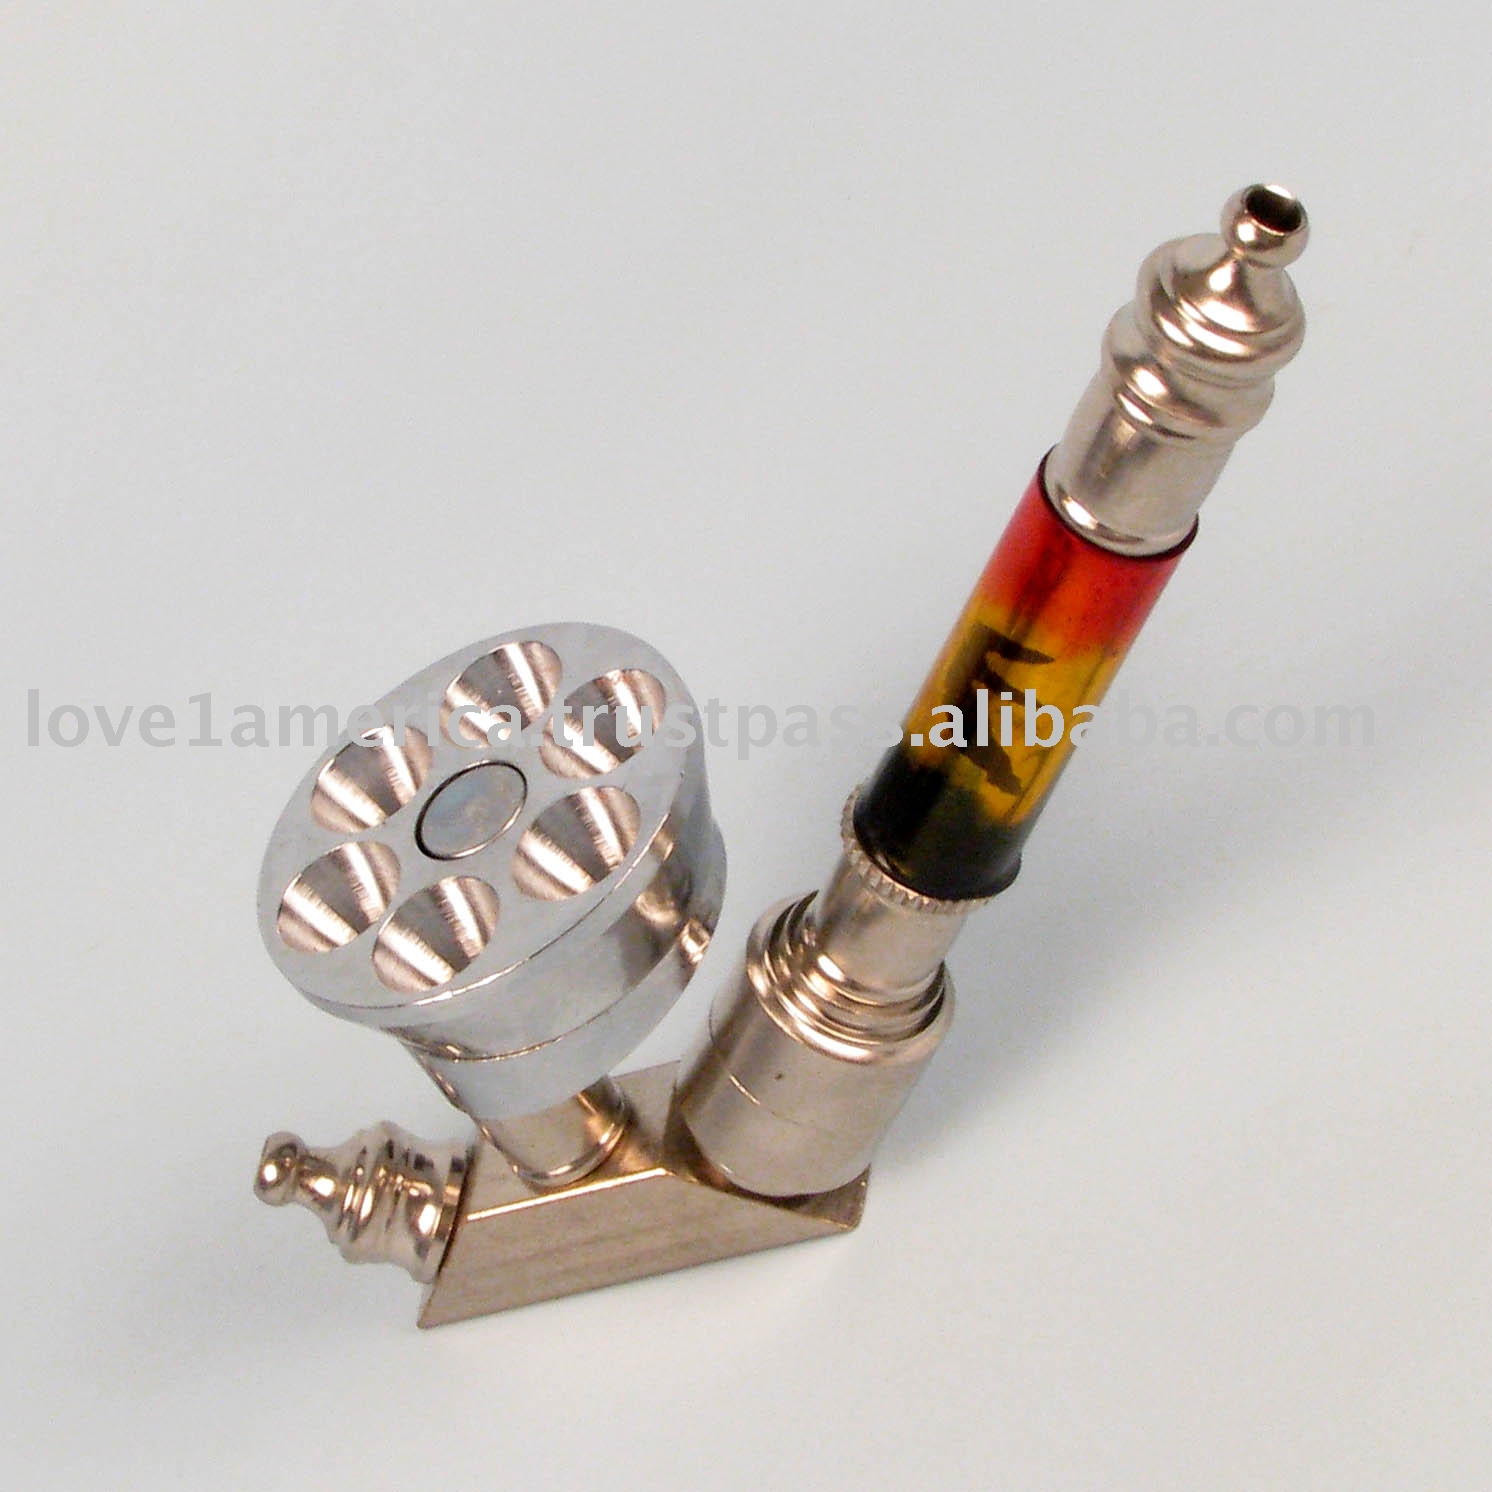 Brass Smoking Pipes, Brass Smoking Pipes Suppliers and Manufacturers ...